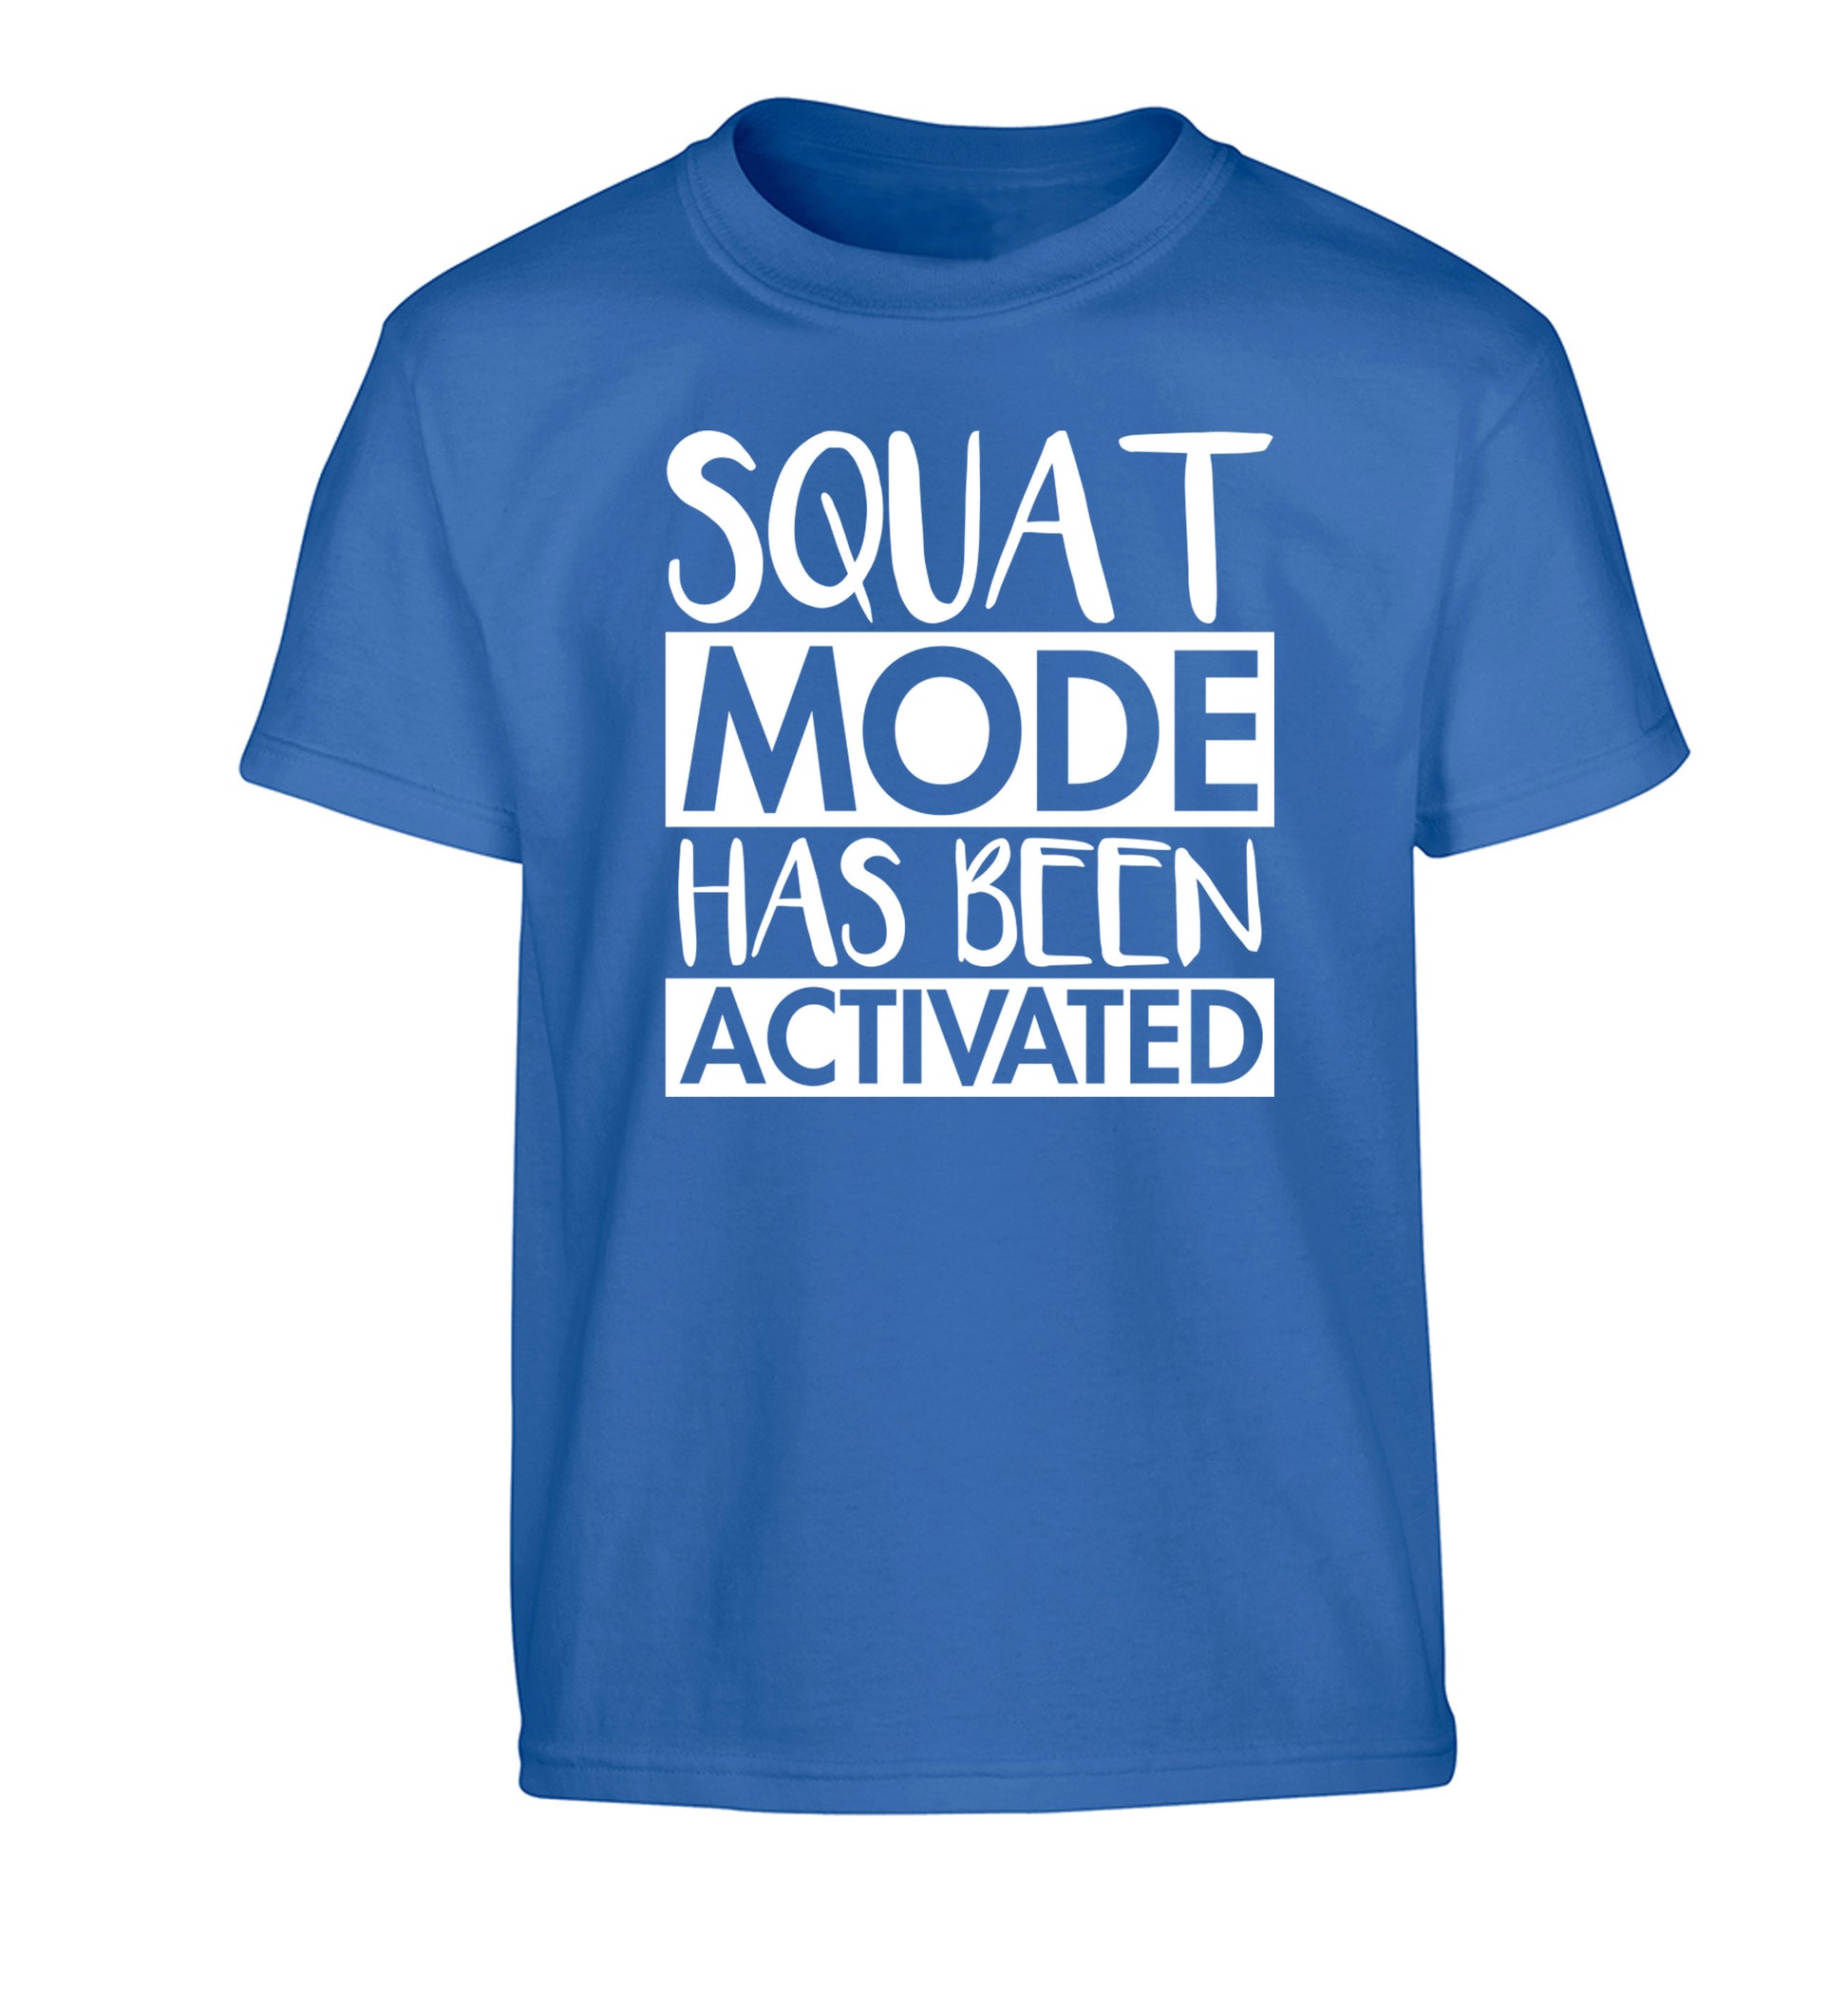 Squat mode activated Children's blue Tshirt 12-14 Years